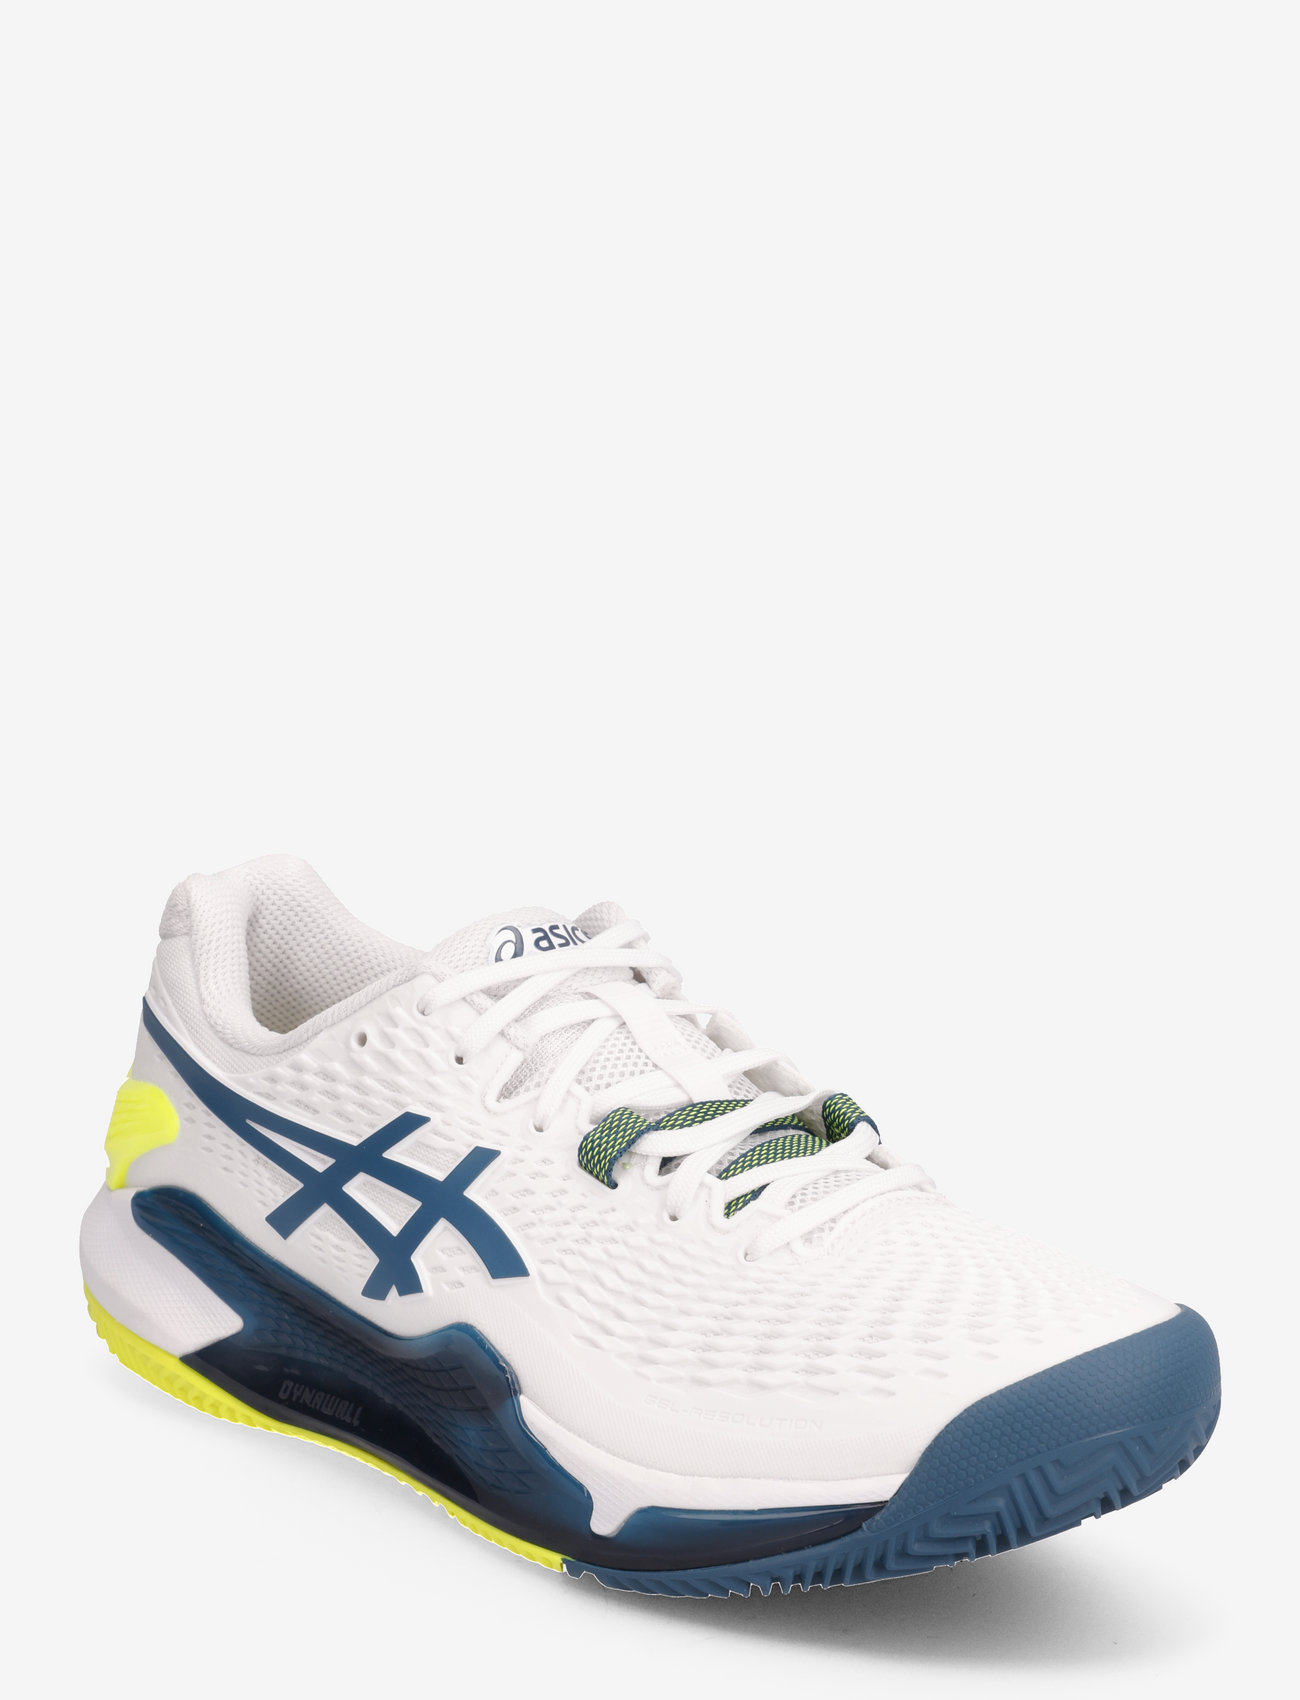 Asics - GEL-RESOLUTION 9 CLAY - white/restful teal - 0